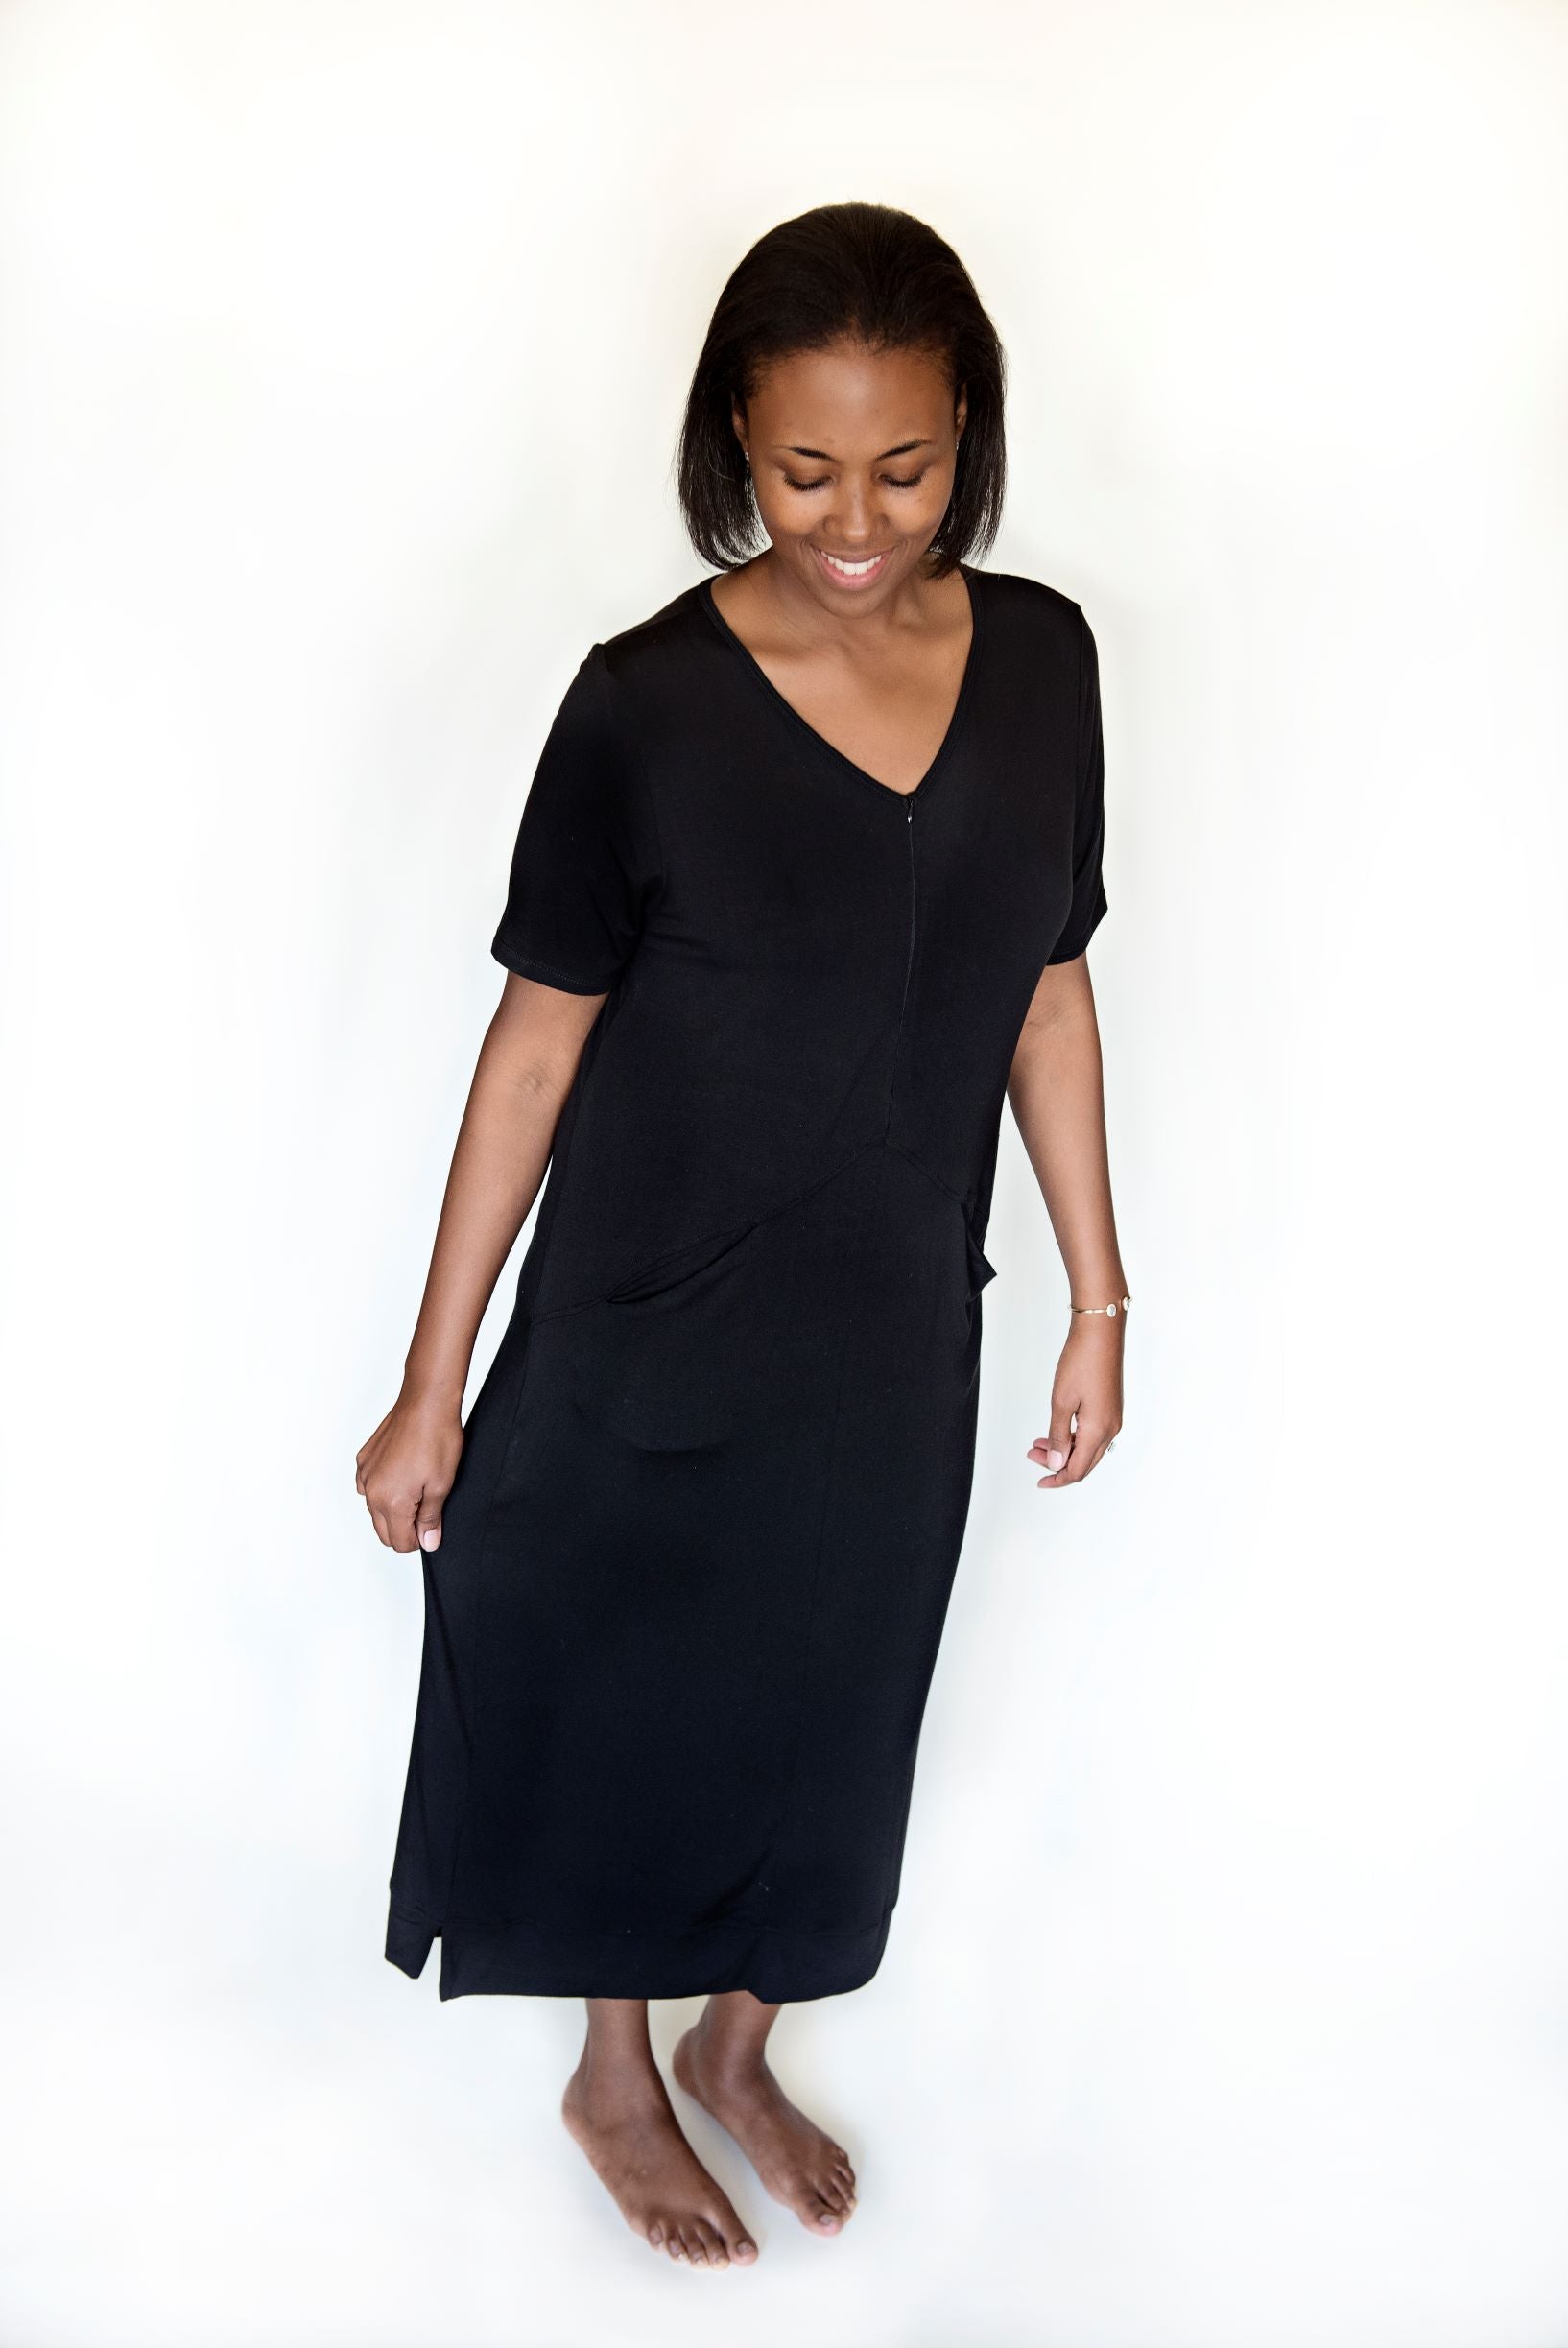 Black comfortable lounge dress made from micro modal and spandex. Pockets and deep zipper. 